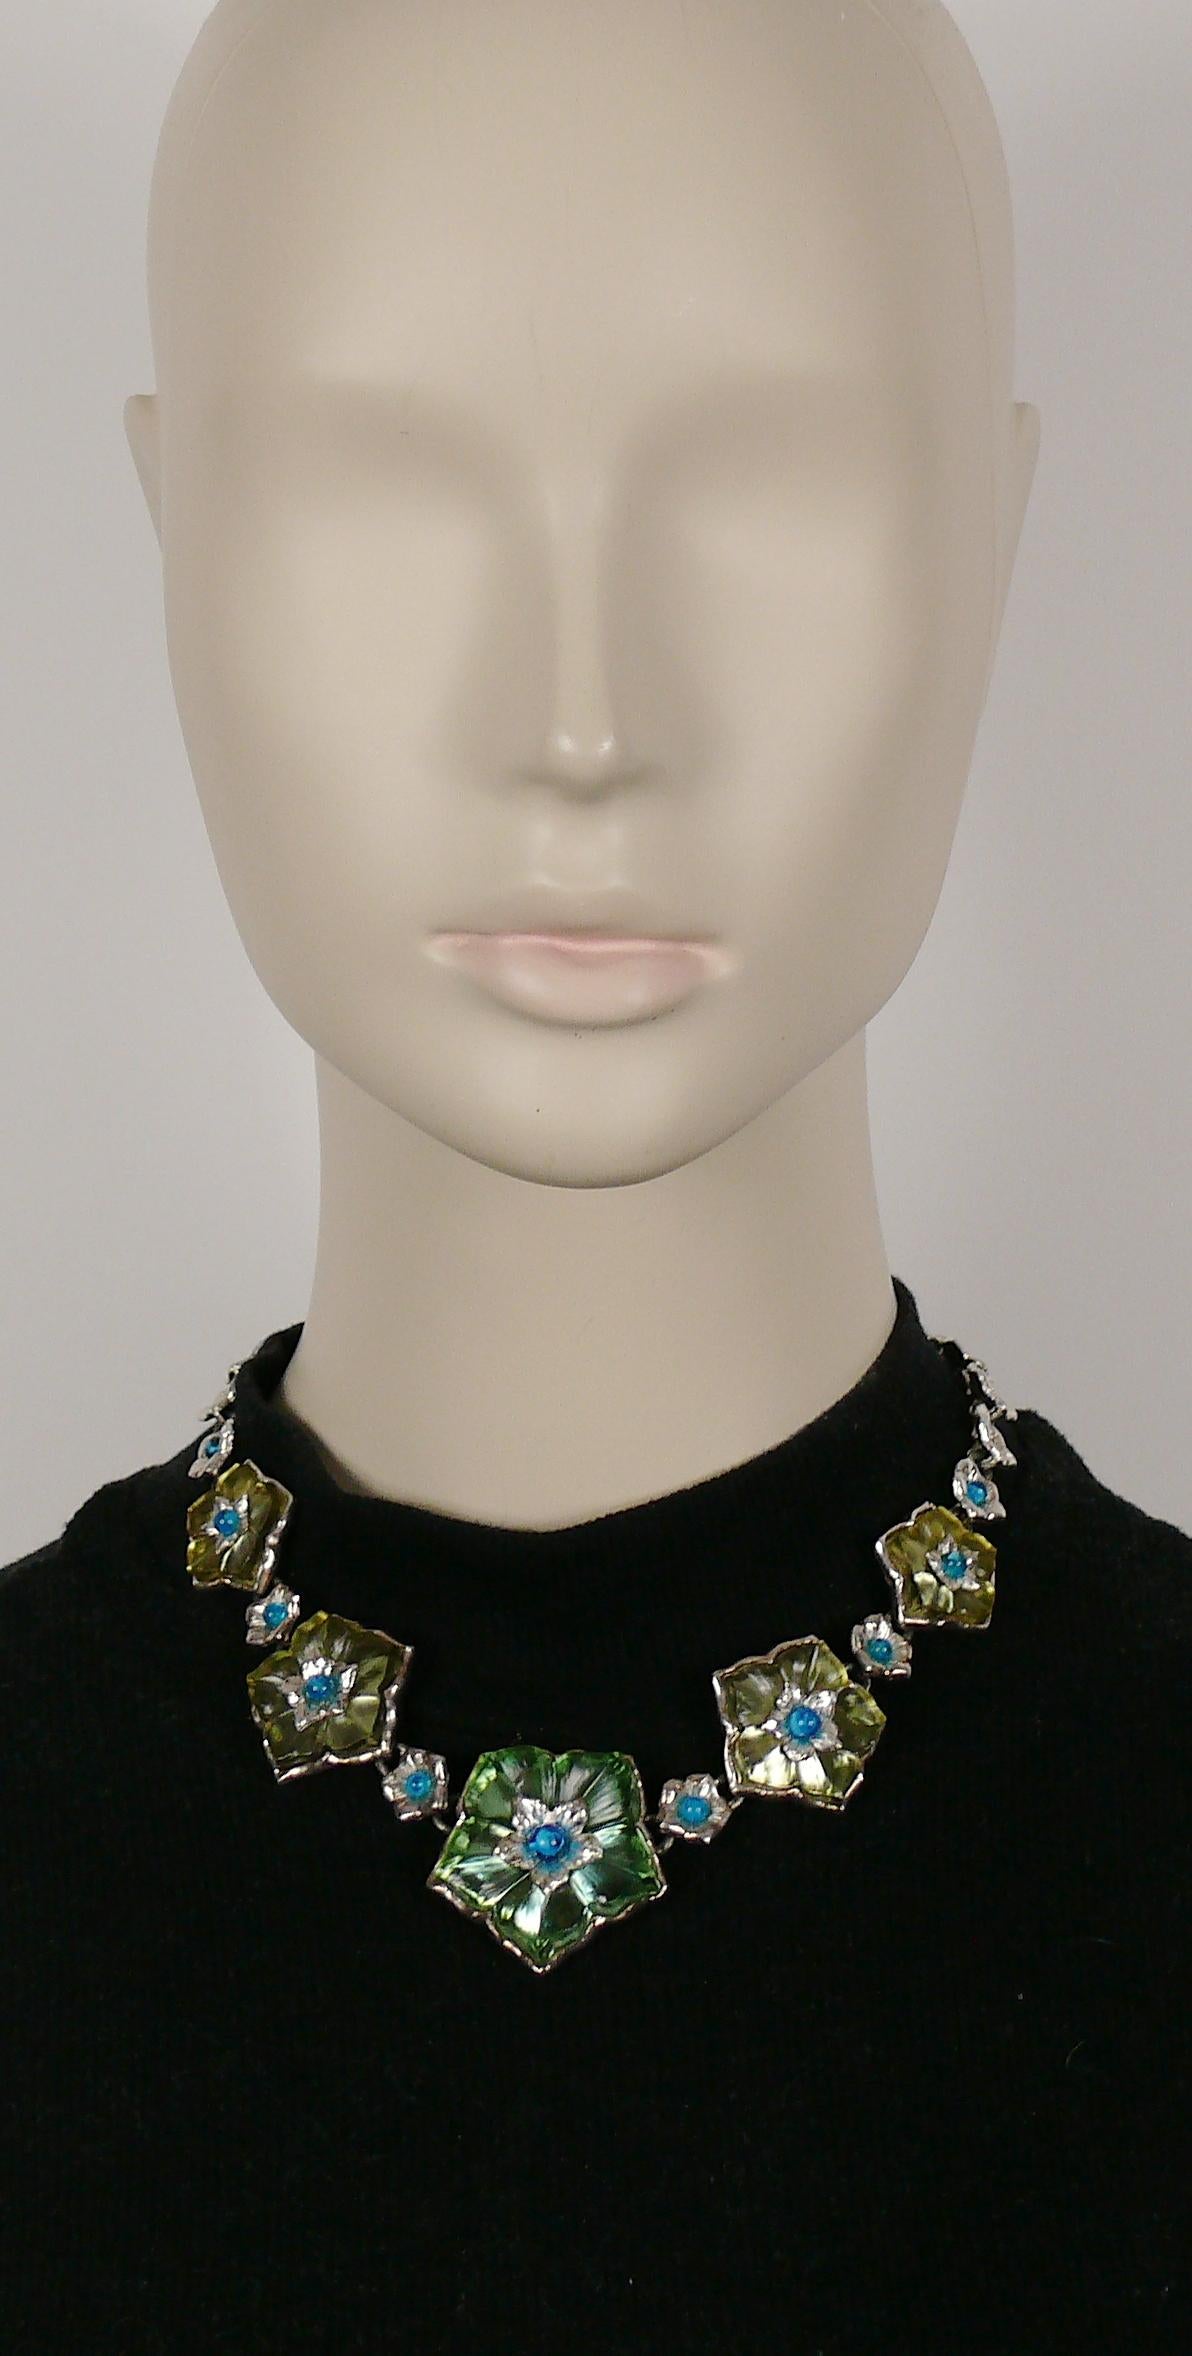 KENZO vintage silver toned floral necklace featuring resin flowers with aqua blue glass beads embellishement.

Silver tone metal hardware.

Adjustable hook closure.

Embossed KENZO PARIS.

Indicative measurements : adjustable length from approx. 41